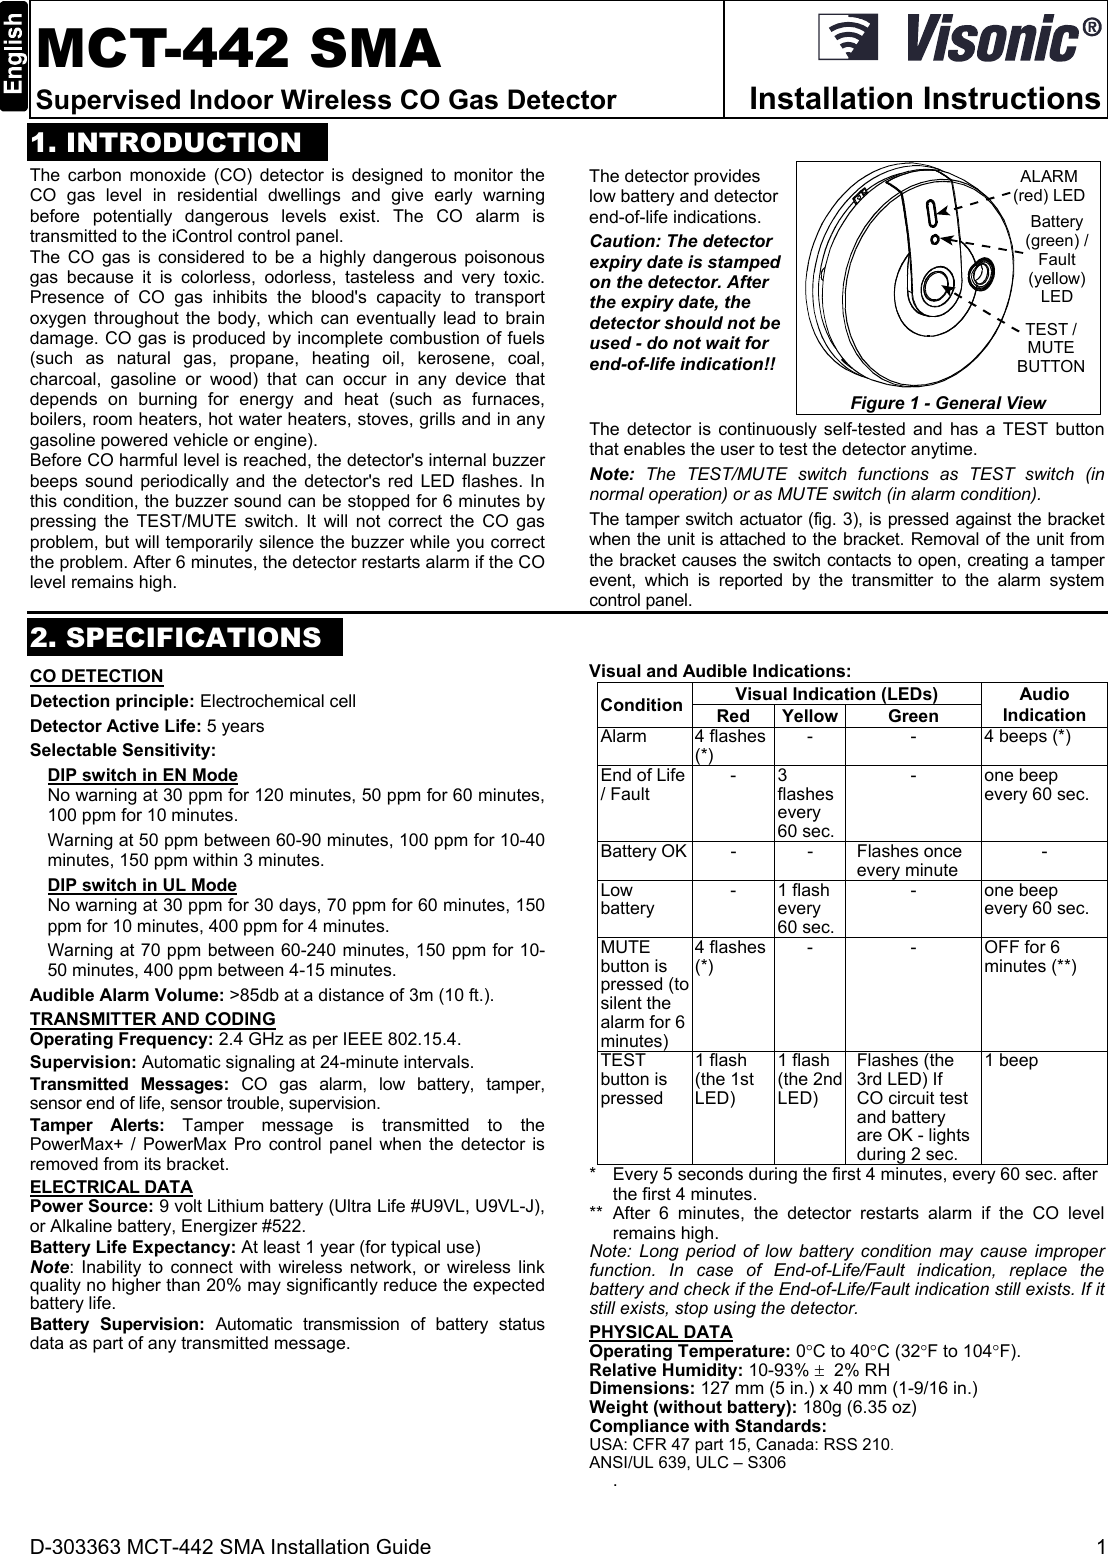 D-303363 MCT-442 SMA Installation Guide  1  MCT-442 SMA Supervised Indoor Wireless CO Gas Detector  Installation Instructions1. INTRODUCTION The carbon monoxide (CO) detector is designed to monitor the CO gas level in residential dwellings and give early warning before potentially dangerous levels exist. The CO alarm is transmitted to the iControl control panel. The CO gas is considered to be a highly dangerous poisonous gas because it is colorless, odorless, tasteless and very toxic. Presence of CO gas inhibits the blood&apos;s capacity to transport oxygen throughout the body, which can eventually lead to brain damage. CO gas is produced by incomplete combustion of fuels (such as natural gas, propane, heating oil, kerosene, coal, charcoal, gasoline or wood) that can occur in any device that depends on burning for energy and heat (such as furnaces, boilers, room heaters, hot water heaters, stoves, grills and in any gasoline powered vehicle or engine).  Before CO harmful level is reached, the detector&apos;s internal buzzer beeps sound periodically and the detector&apos;s red LED flashes. In this condition, the buzzer sound can be stopped for 6 minutes by pressing the TEST/MUTE switch. It will not correct the CO gas problem, but will temporarily silence the buzzer while you correct the problem. After 6 minutes, the detector restarts alarm if the CO level remains high.  The detector provides low battery and detector end-of-life indications. Caution: The detector expiry date is stamped on the detector. After the expiry date, the detector should not be used - do not wait for end-of-life indication!! Battery(green) /Fault(yellow)LEDTEST /MUTEBUTTONALARM(red) LEDFigure 1 - General View The detector is continuously self-tested and has a TEST button that enables the user to test the detector anytime. Note:  The TEST/MUTE switch functions as TEST switch (in normal operation) or as MUTE switch (in alarm condition). The tamper switch actuator (fig. 3), is pressed against the bracket when the unit is attached to the bracket. Removal of the unit from the bracket causes the switch contacts to open, creating a tamper event, which is reported by the transmitter to the alarm system control panel. 2. SPECIFICATIONS CO DETECTION Detection principle: Electrochemical cell Detector Active Life: 5 years Selectable Sensitivity:  DIP switch in EN Mode No warning at 30 ppm for 120 minutes, 50 ppm for 60 minutes, 100 ppm for 10 minutes. Warning at 50 ppm between 60-90 minutes, 100 ppm for 10-40 minutes, 150 ppm within 3 minutes. DIP switch in UL Mode No warning at 30 ppm for 30 days, 70 ppm for 60 minutes, 150 ppm for 10 minutes, 400 ppm for 4 minutes. Warning at 70 ppm between 60-240 minutes, 150 ppm for 10-50 minutes, 400 ppm between 4-15 minutes. Audible Alarm Volume: &gt;85db at a distance of 3m (10 ft.). TRANSMITTER AND CODING Operating Frequency: 2.4 GHz as per IEEE 802.15.4. Supervision: Automatic signaling at 24-minute intervals. Transmitted Messages: CO gas alarm, low battery, tamper, sensor end of life, sensor trouble, supervision. Tamper Alerts: Tamper message is transmitted to the PowerMax+ / PowerMax Pro control panel when the detector is removed from its bracket.  ELECTRICAL DATA Power Source: 9 volt Lithium battery (Ultra Life #U9VL, U9VL-J), or Alkaline battery, Energizer #522. Battery Life Expectancy: At least 1 year (for typical use) Note: Inability to connect with wireless network, or wireless link quality no higher than 20% may significantly reduce the expected battery life. Battery Supervision: Automatic transmission of battery status data as part of any transmitted message. Visual and Audible Indications: ConditionVisual Indication (LEDs)  Audio Indication Red Yellow Green Alarm 4 flashes (*) - -  4 beeps (*) End of Life / Fault  -3 flashes every 60 sec. - one beep every 60 sec. Battery OK - - Flashes once every minute  -Low battery  - 1 flash every 60 sec. - one beep every 60 sec. MUTE button is pressed (to silent the alarm for 6 minutes)4 flashes (*)  - -  OFF for 6 minutes (**) TEST button is  pressed 1 flash (the 1st LED)   1 flash (the 2nd LED) Flashes (the 3rd LED) If CO circuit test and battery are OK - lights during 2 sec. 1 beep*  Every 5 seconds during the first 4 minutes, every 60 sec. after the first 4 minutes. ** After 6 minutes, the detector restarts alarm if the CO level remains high. Note: Long period of low battery condition may cause improper function. In case of End-of-Life/Fault indication, replace the battery and check if the End-of-Life/Fault indication still exists. If it still exists, stop using the detector. PHYSICAL DATA Operating Temperature: 0C to 40C (32F to 104F). Relative Humidity: 10-93%   2% RH Dimensions: 127 mm (5 in.) x 40 mm (1-9/16 in.) Weight (without battery): 180g (6.35 oz)  Compliance with Standards:  USA: CFR 47 part 15, Canada: RSS 210. ANSI/UL 639, ULC – S306 .